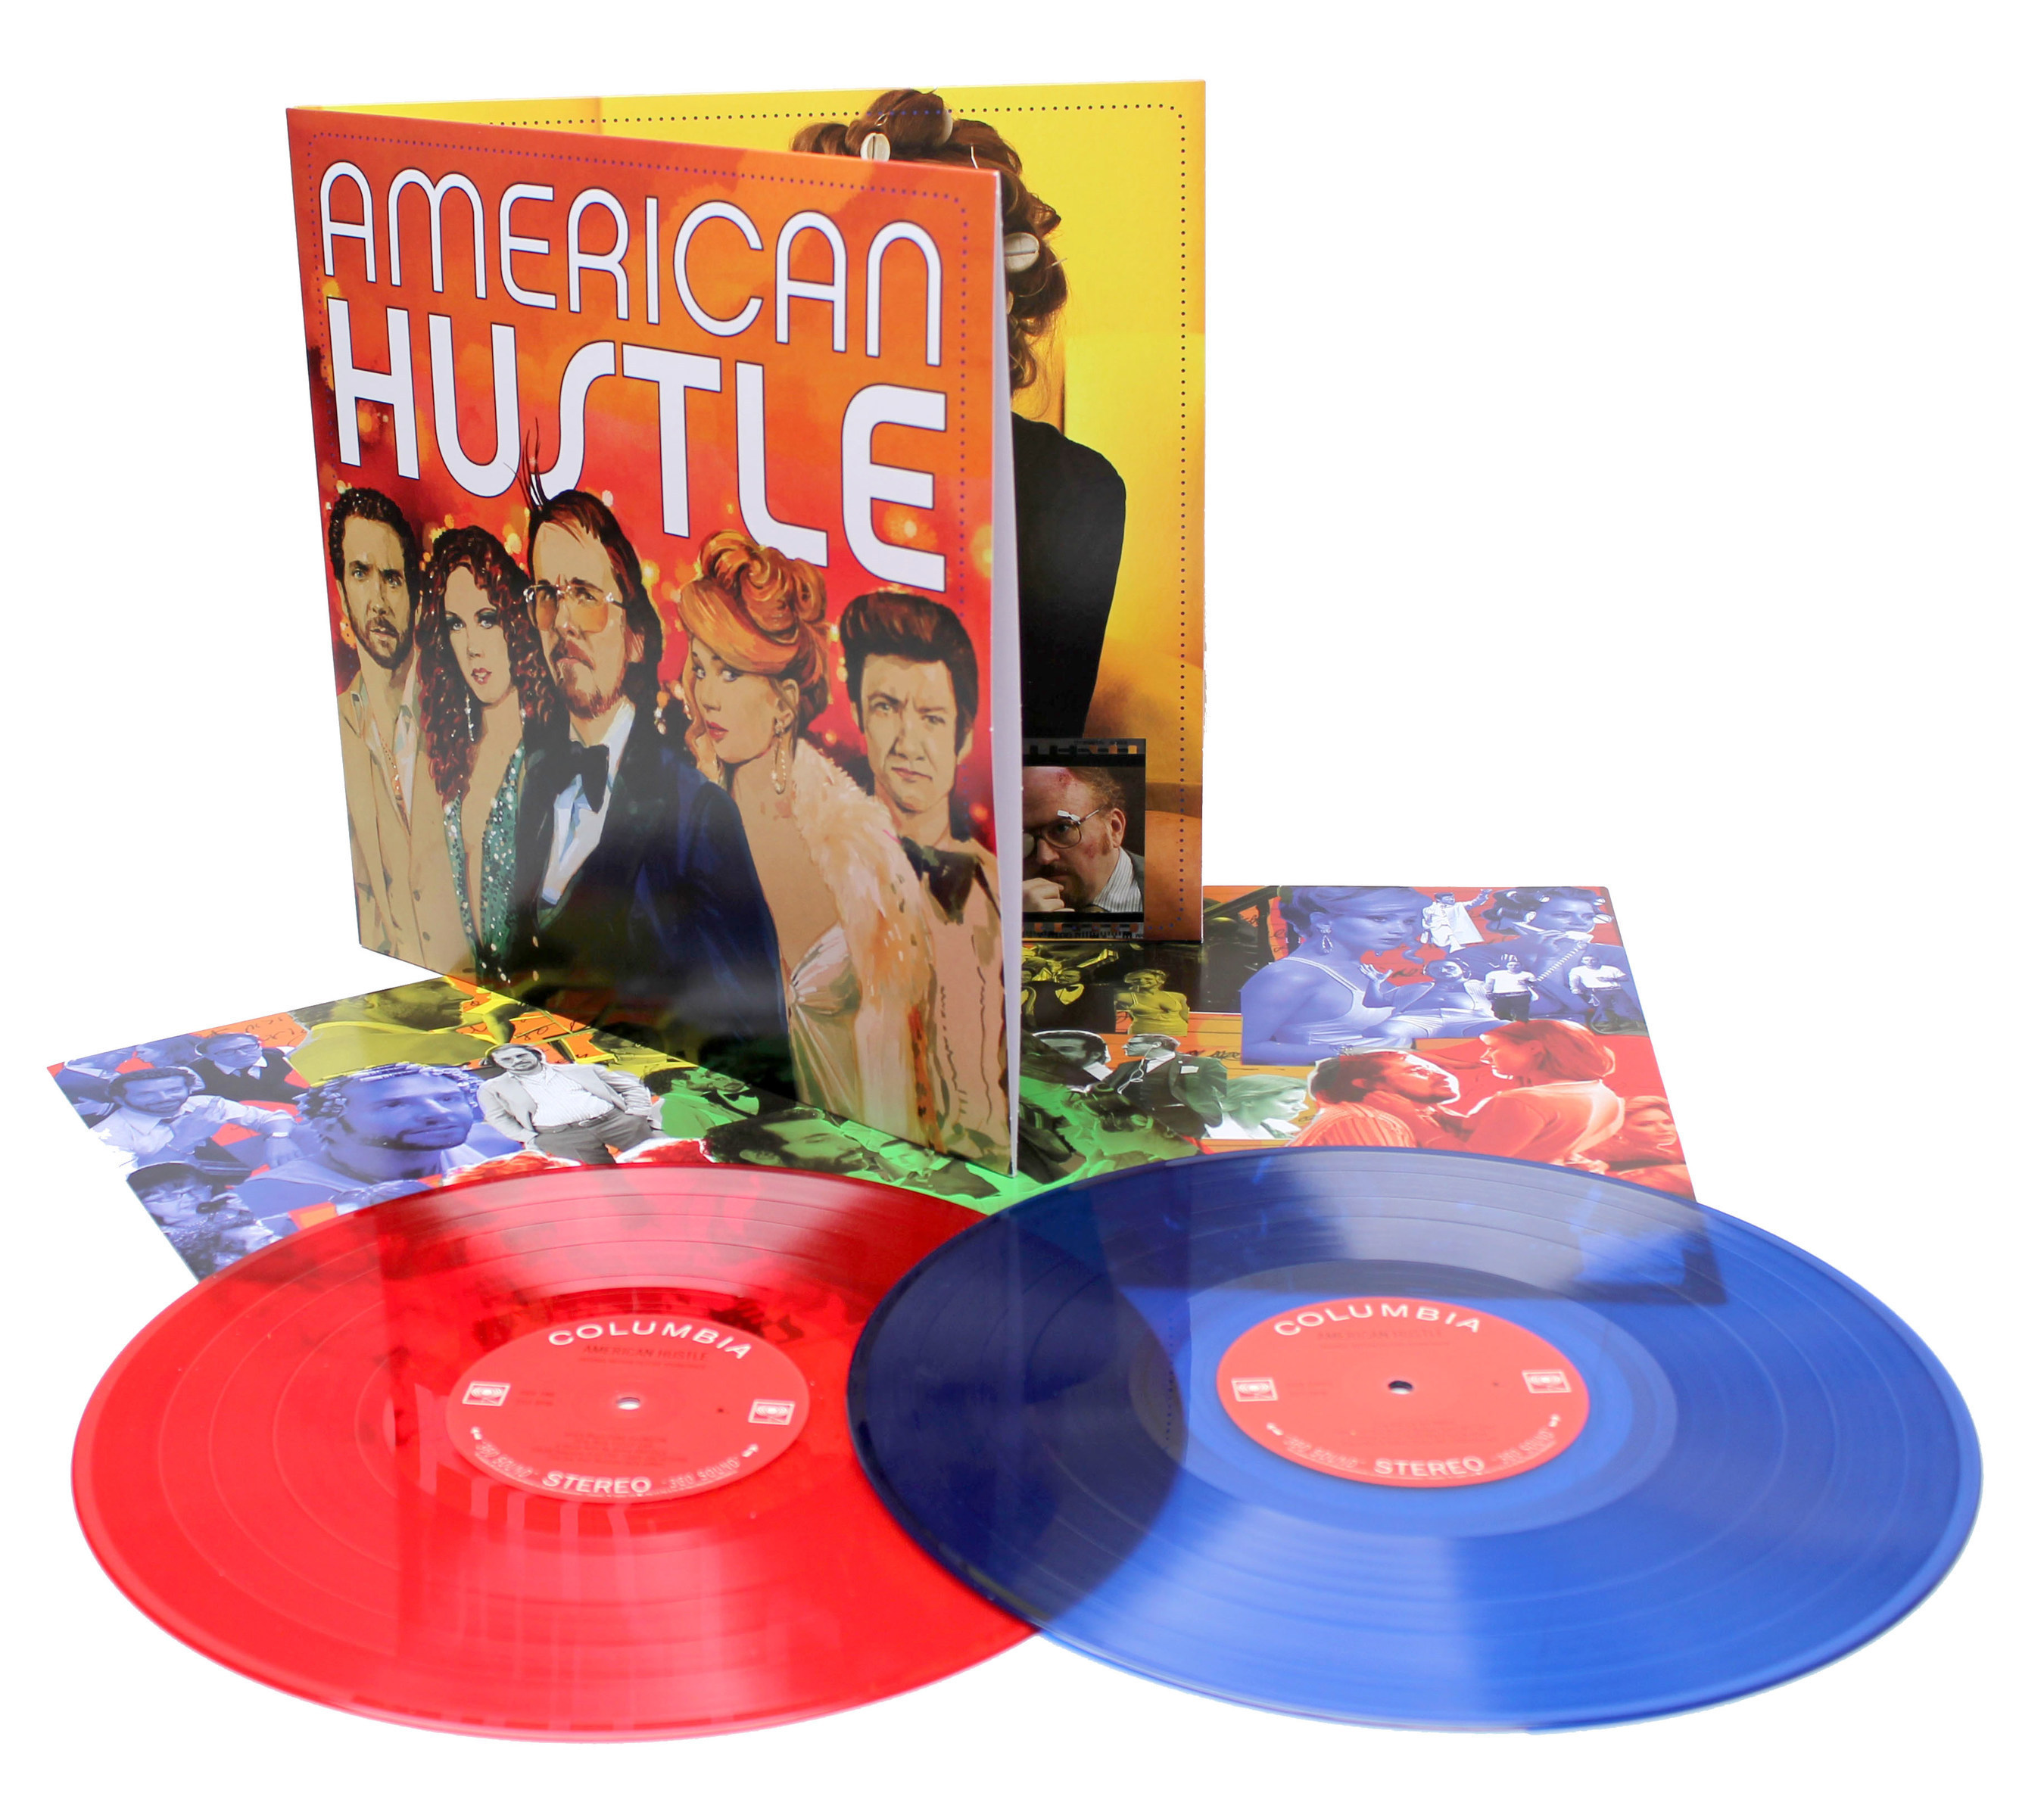 American Hustle - Original Motion Picture Soundtrack 12" LP gatefold blue and red colored 150 gram vinyl edition available November 28th.